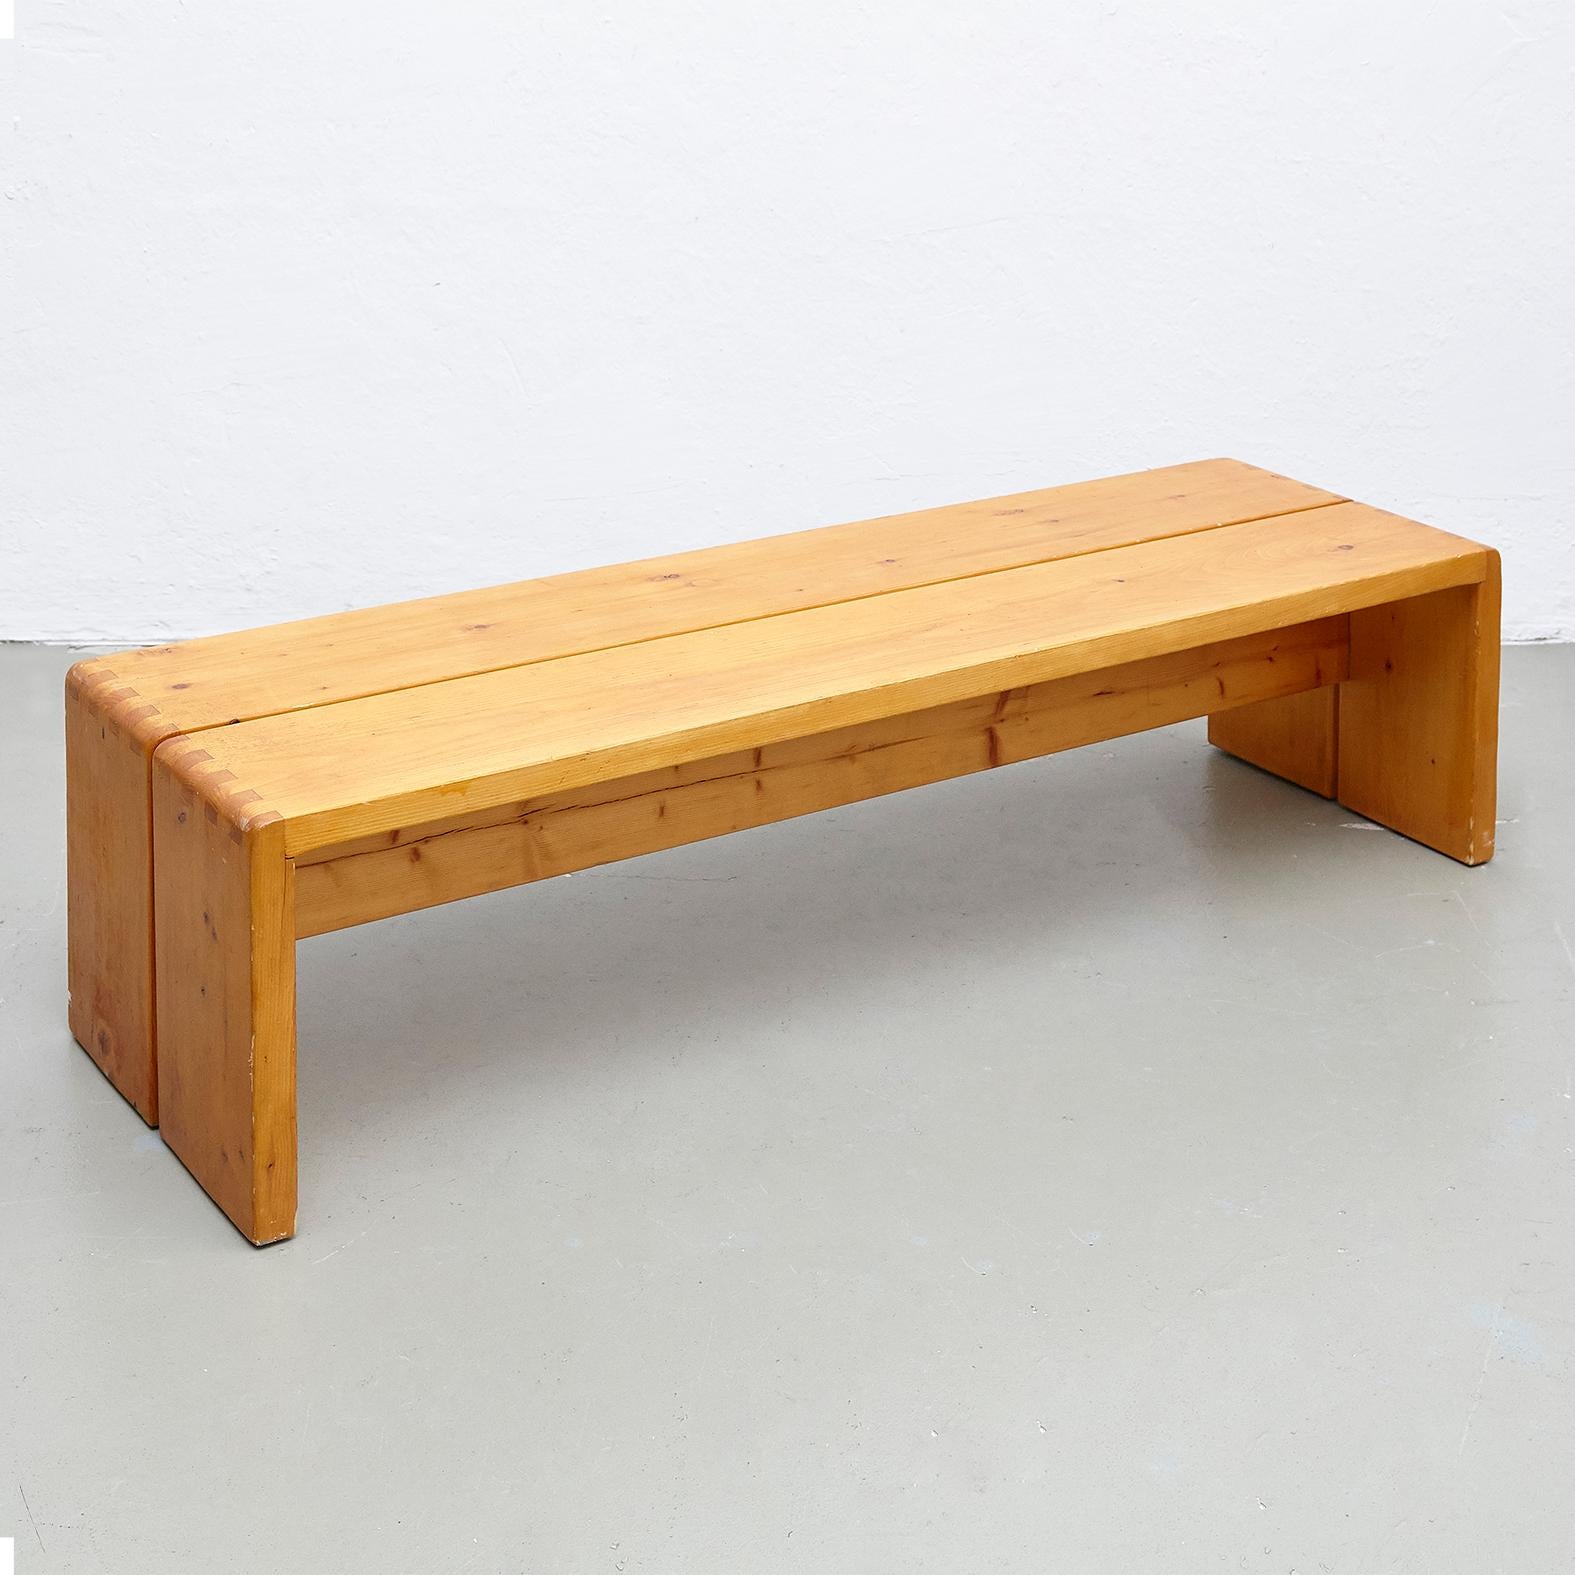 French Charlotte Perriand, Mid Century Modern Large Wood Bench for Les Arcs, circa 1960